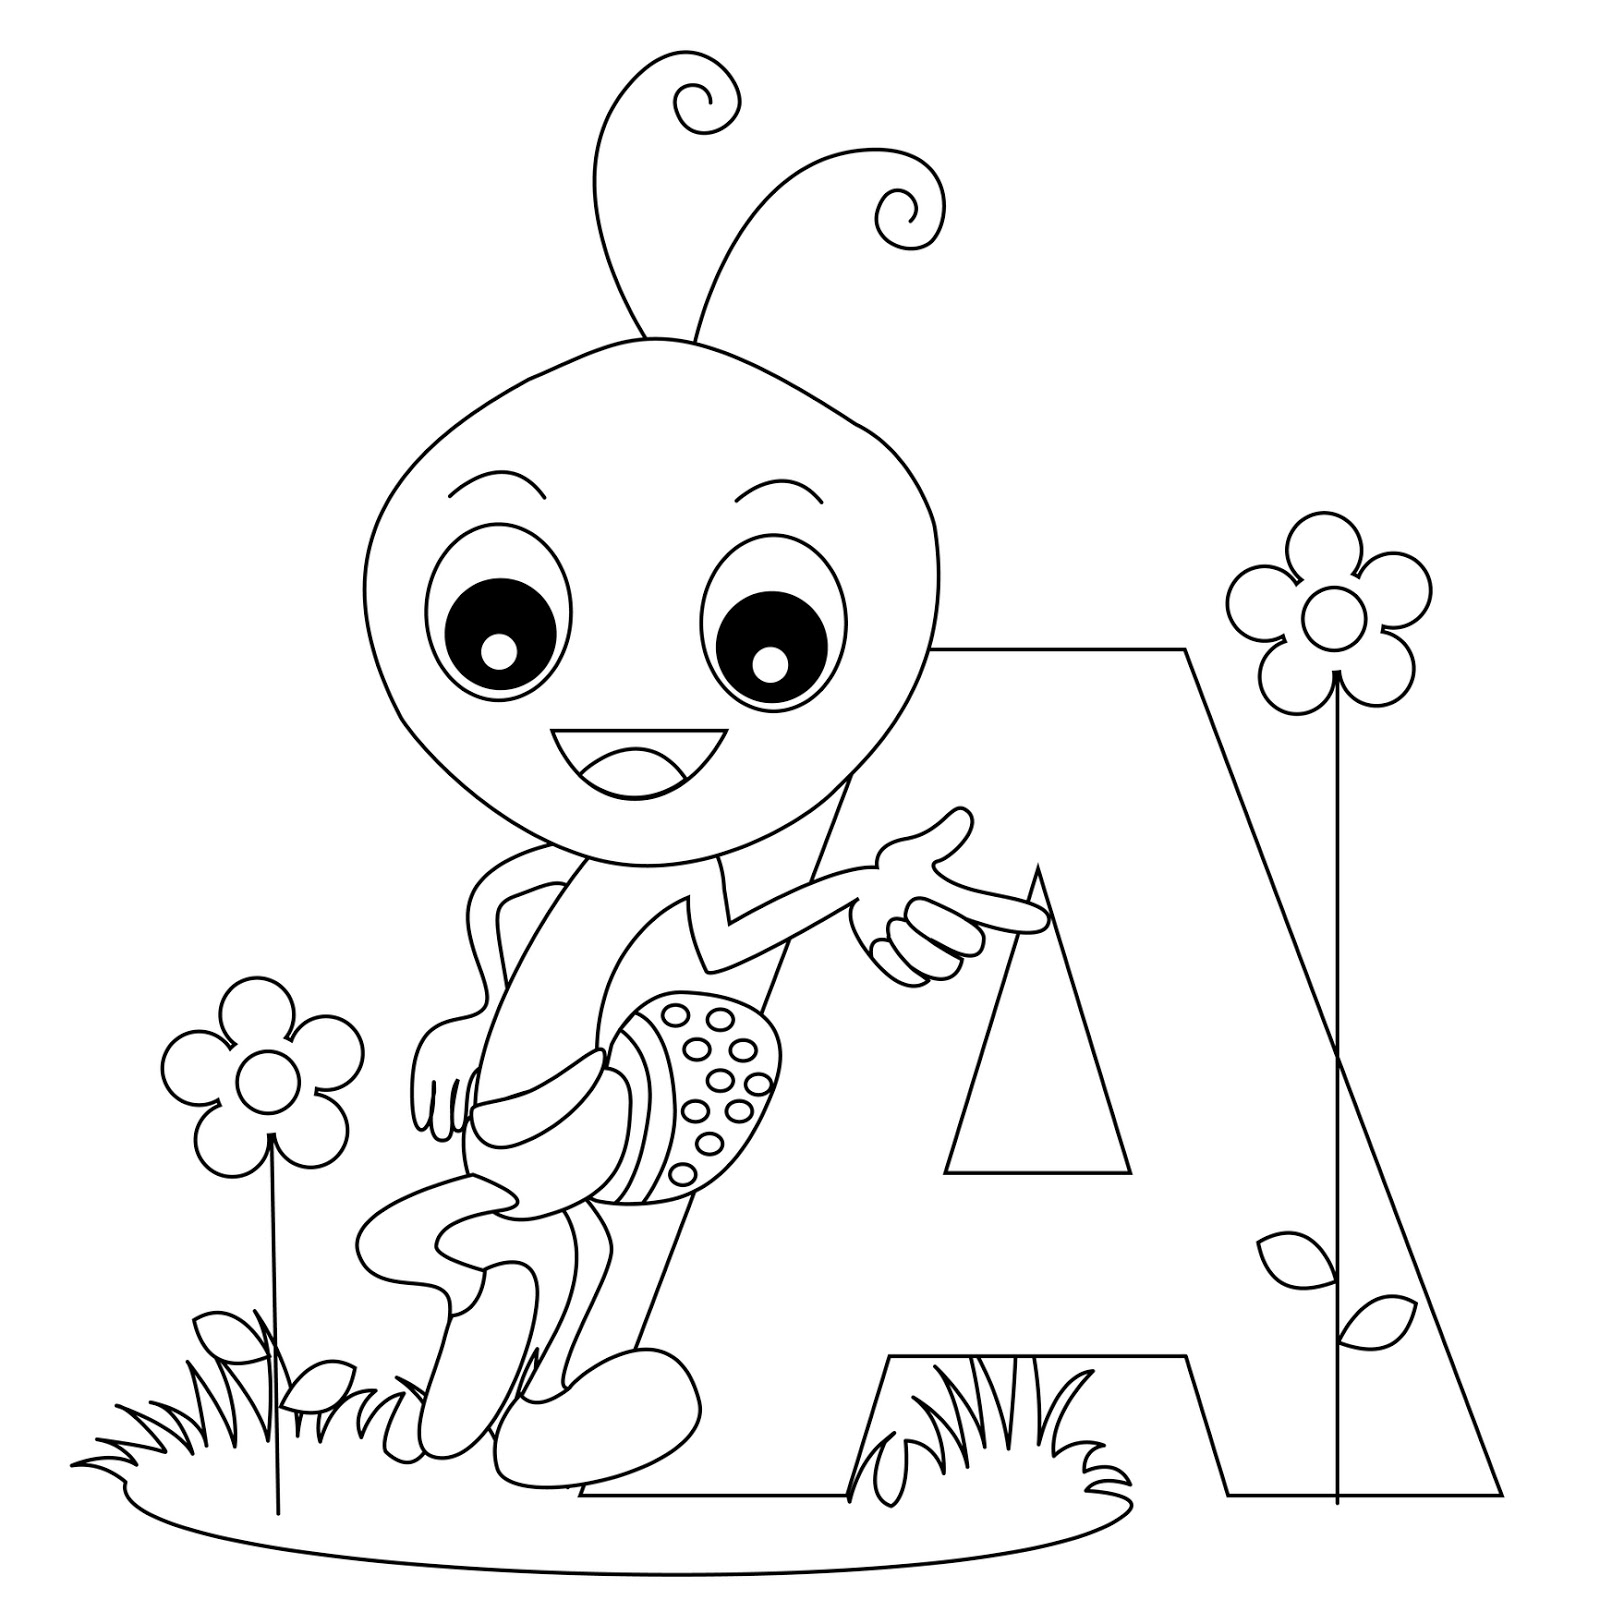 Coloring page: Alphabet (Educational) #124600 - Printable coloring pages